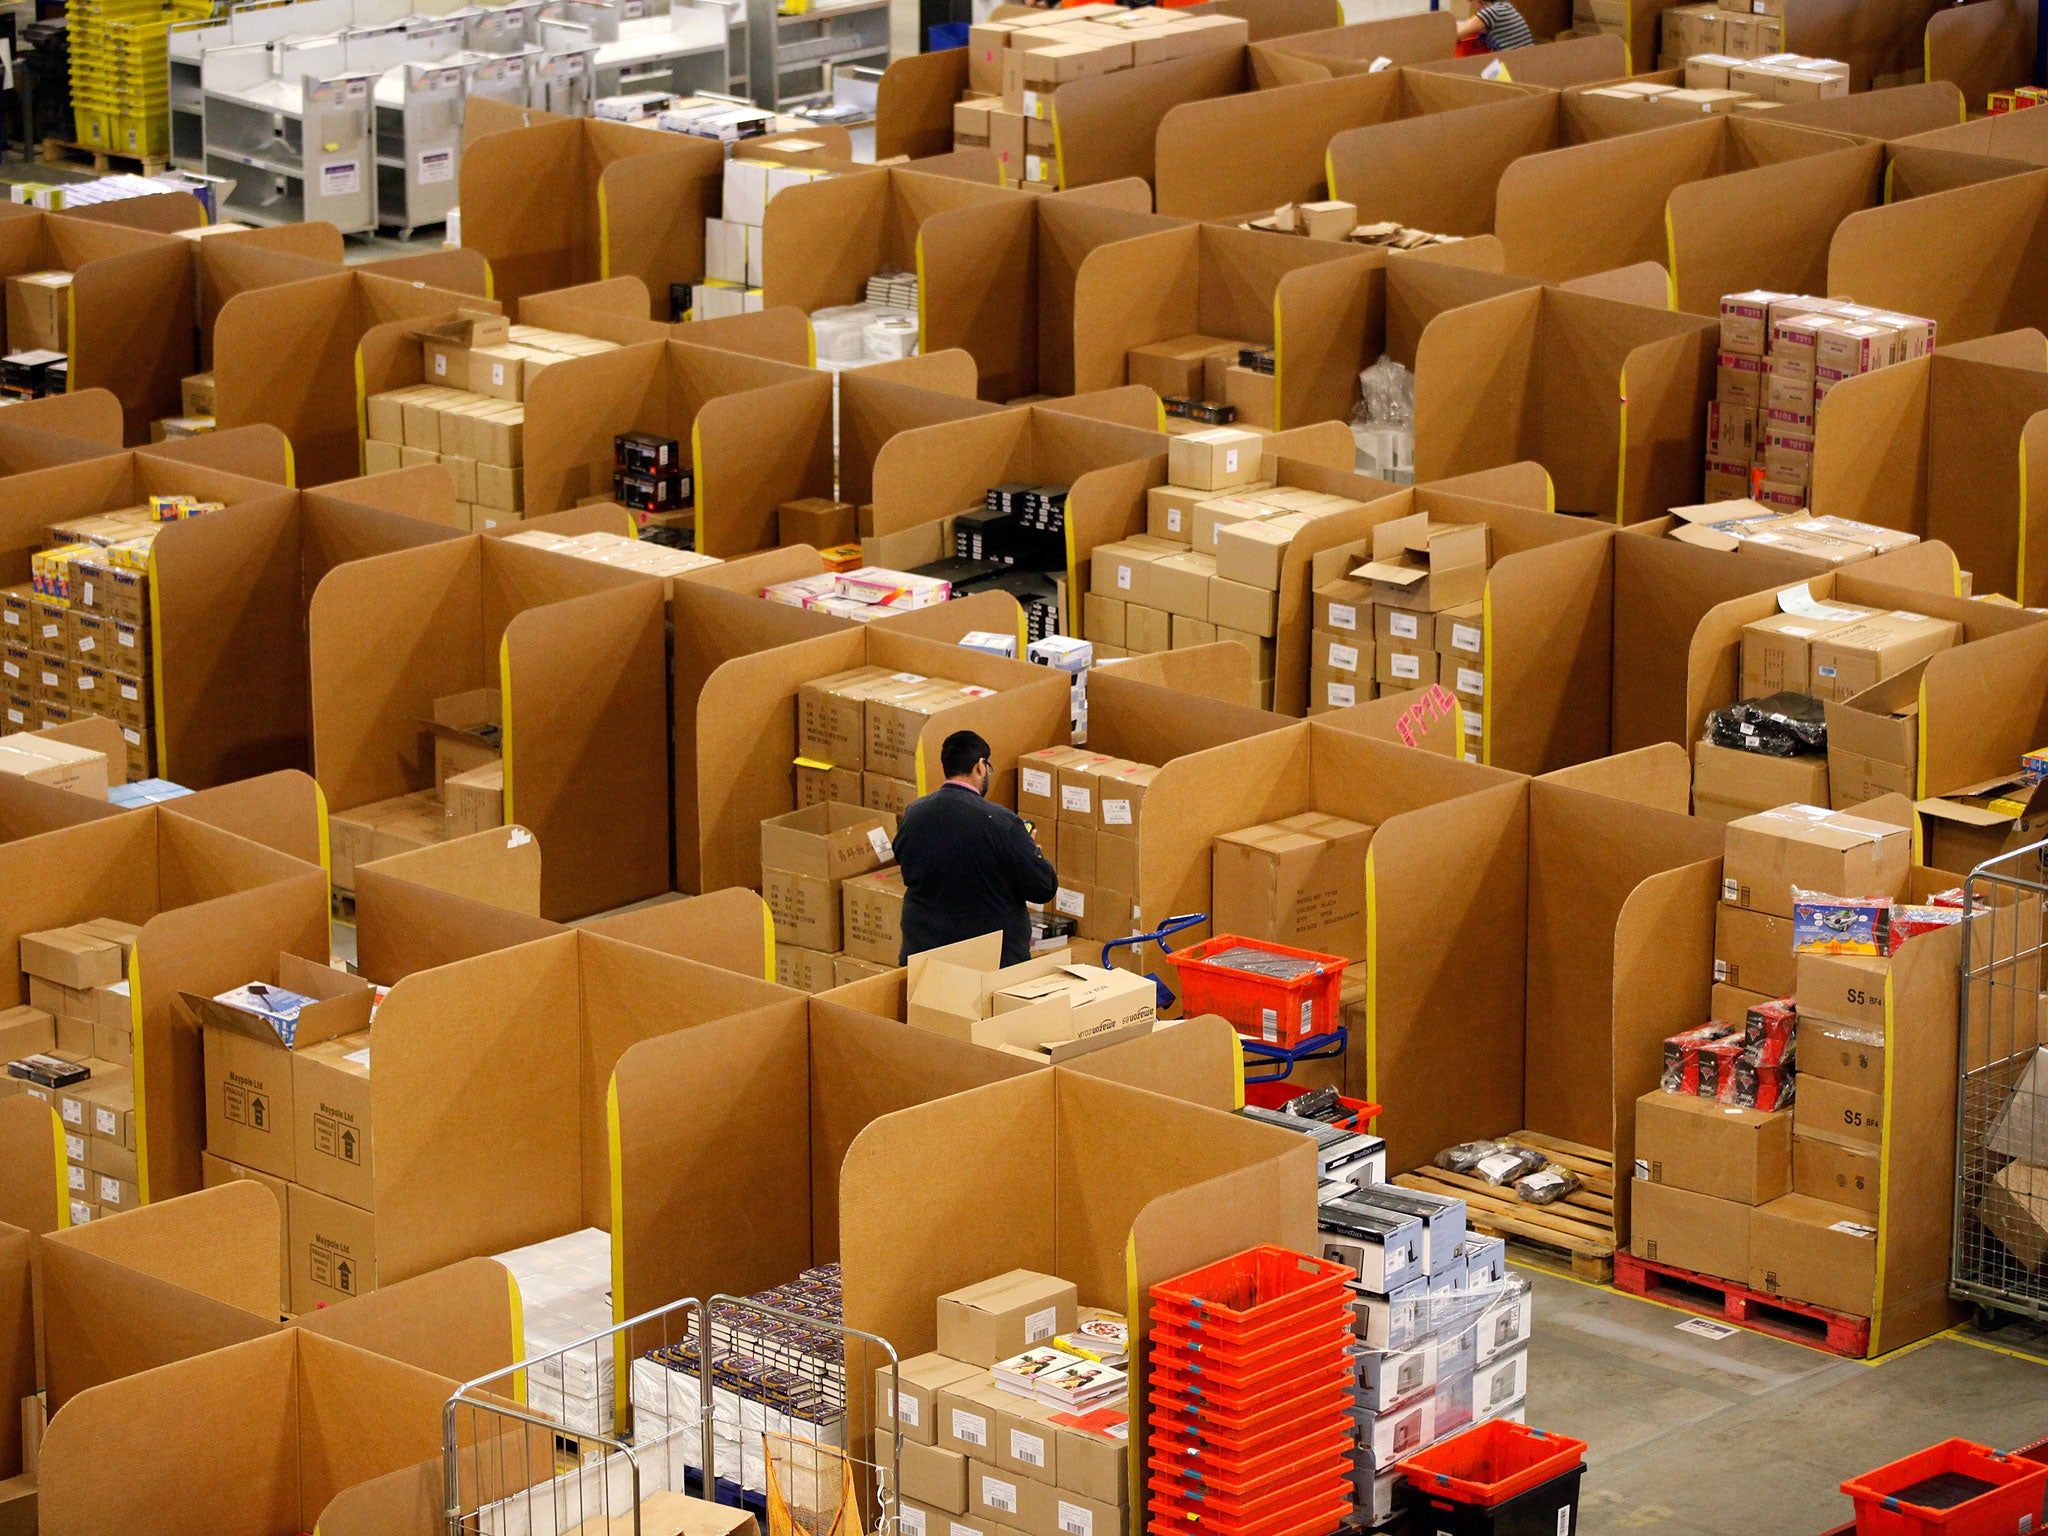 Amazon's high staff turnover and low wages makes theft a particular concern